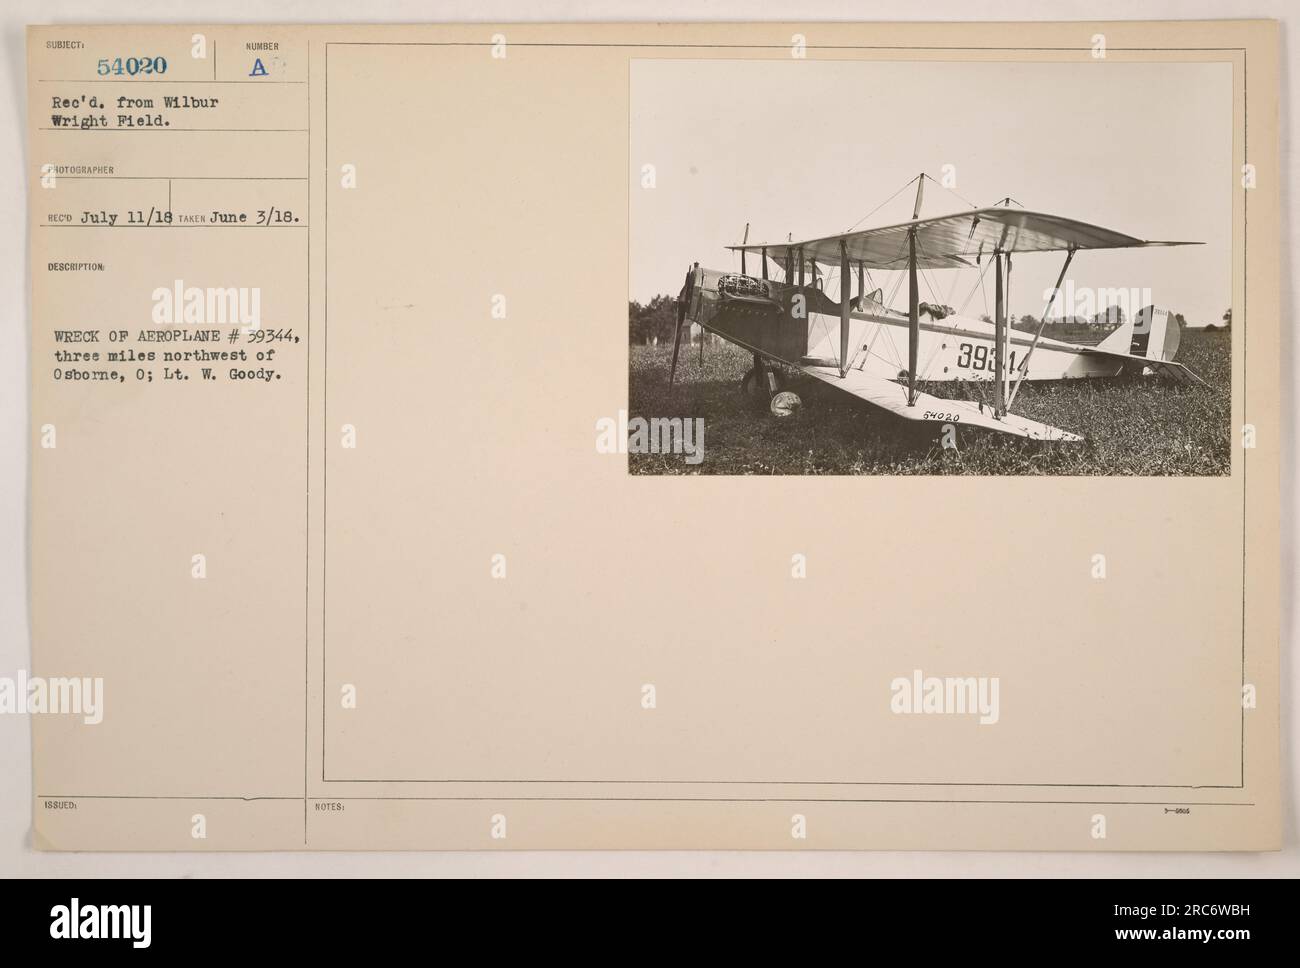 Wreck of Aeroplane #39344, located three miles northwest of Osborne, Ohio. The photograph shows the damaged aircraft belonging to Lt. W. Goody. The image was taken on June 3, 1918, and received from Wilbur Wright Field on July 11, 1918. The descriptive label reads as 'BU MOTES: 393 14.' Stock Photo